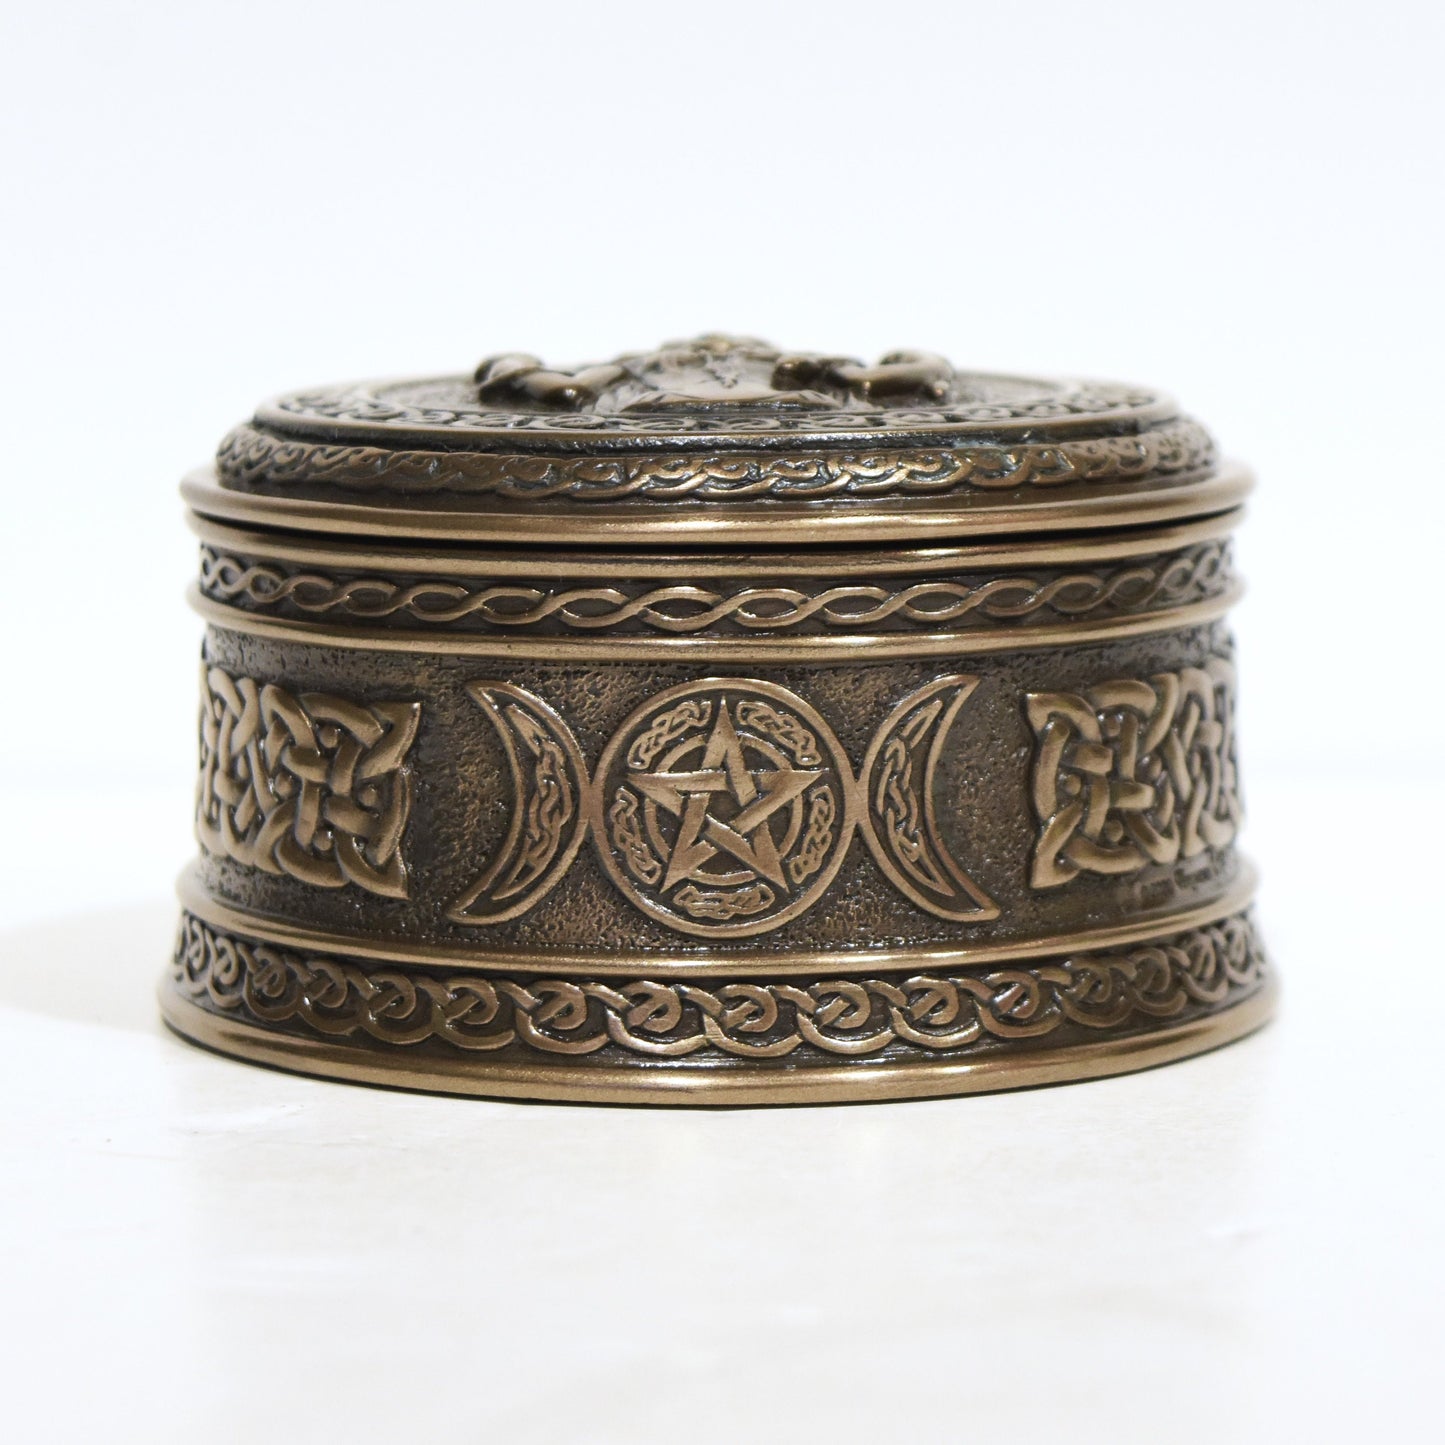 Hecate Hekate - Jewelry Box - Ancient Greek Goddess of Magic, Witchcraft, the Night, Moon, Ghosts and Necromancy- Cold Cast Bronze Resin